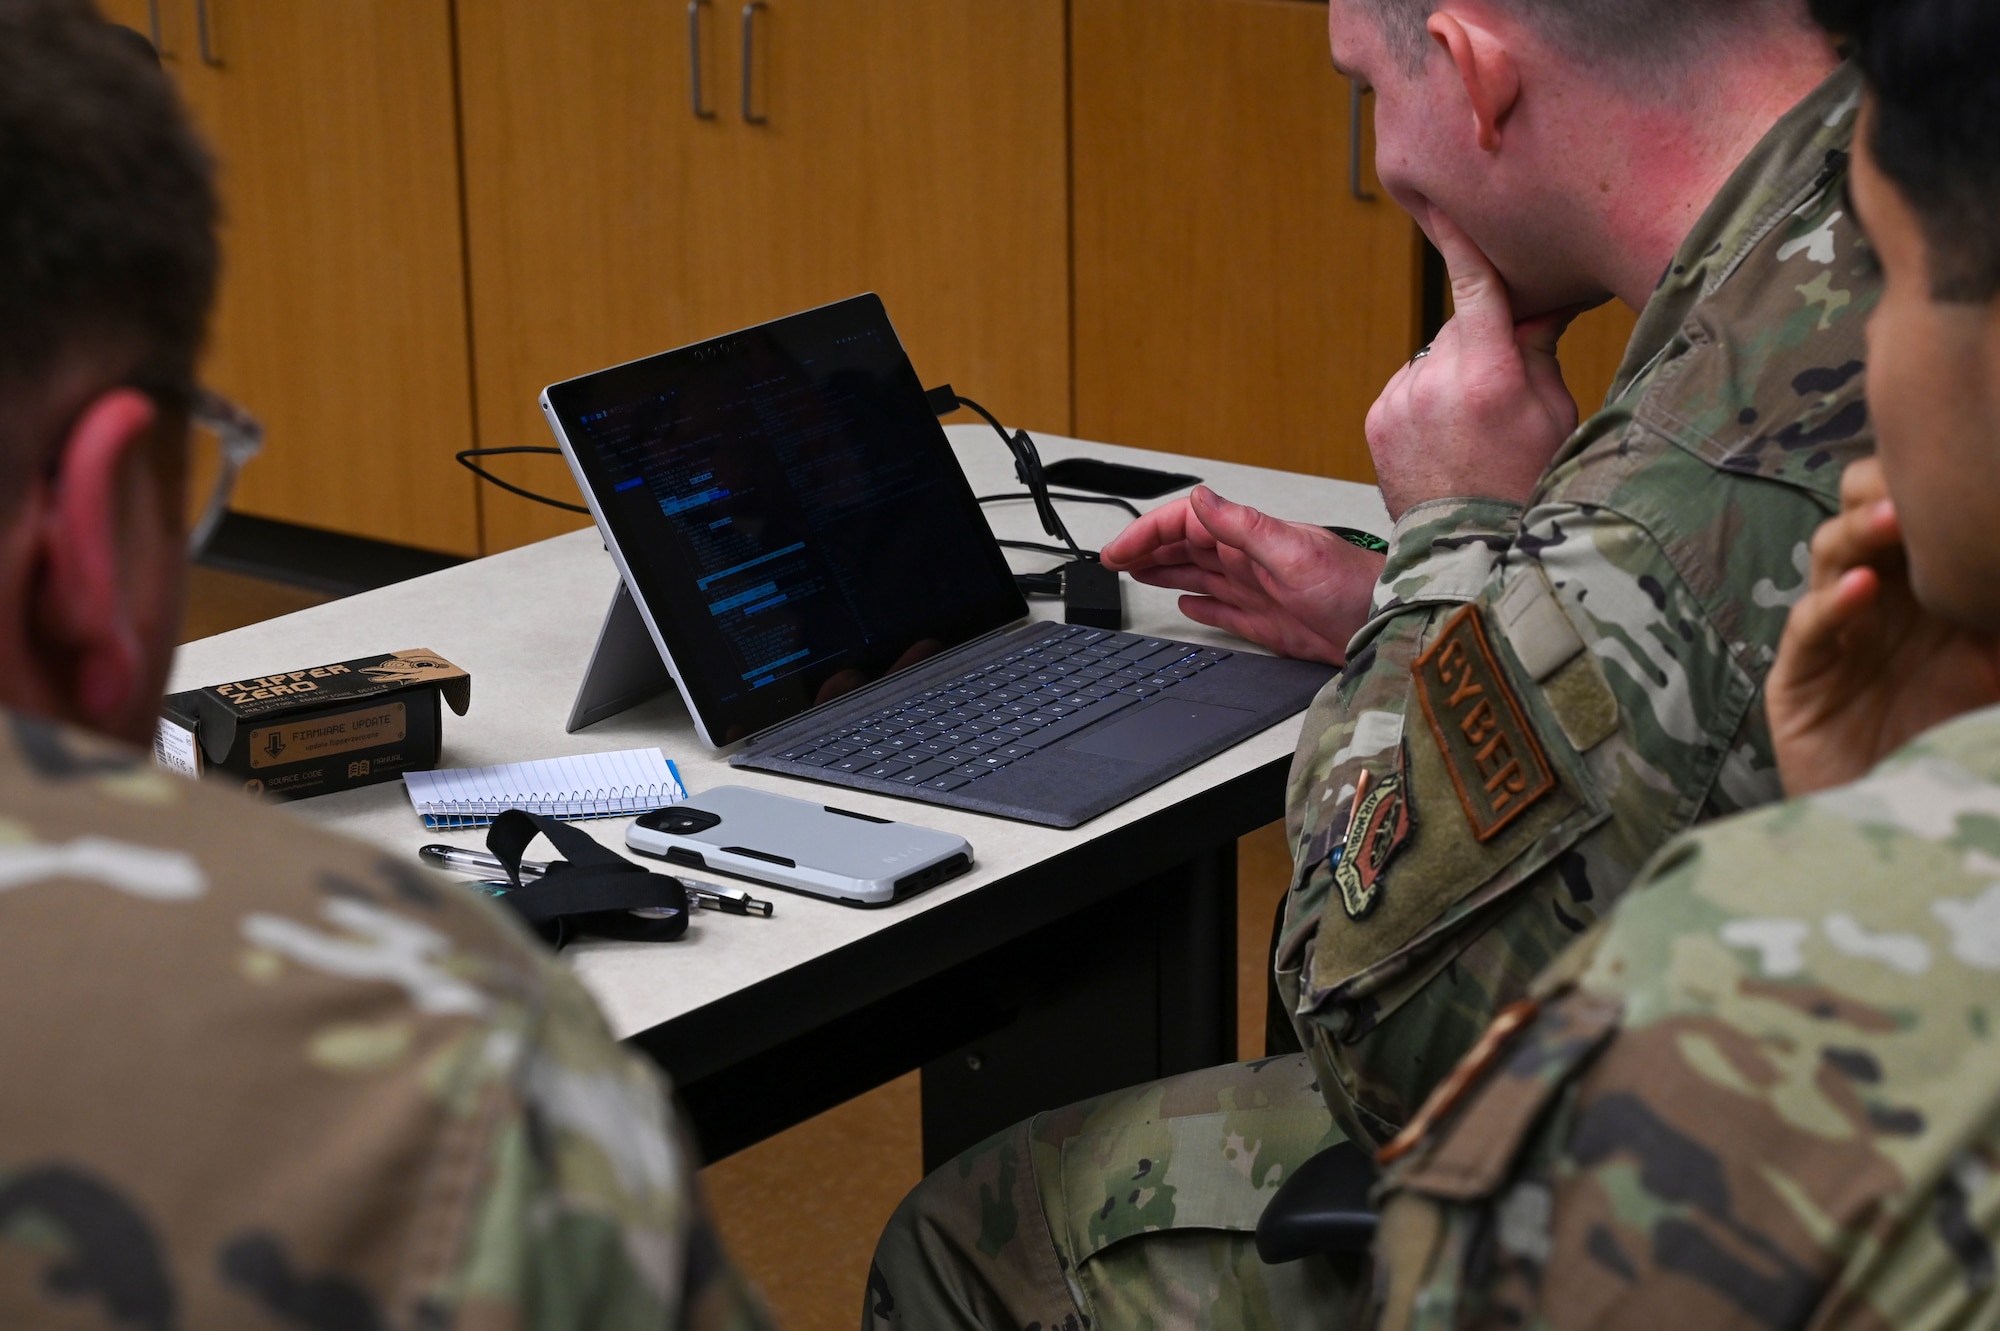 Dyess Airmen attempt a brute force access into a server during the Hackathon event on Dyess Air Force Base, Texas, Oct. 26, 2023. The event taught Airmen from various trades new skills in computer science that may not have been available to them in their career field. (U.S. Air Force photo by Senior Airman Sophia Robello)